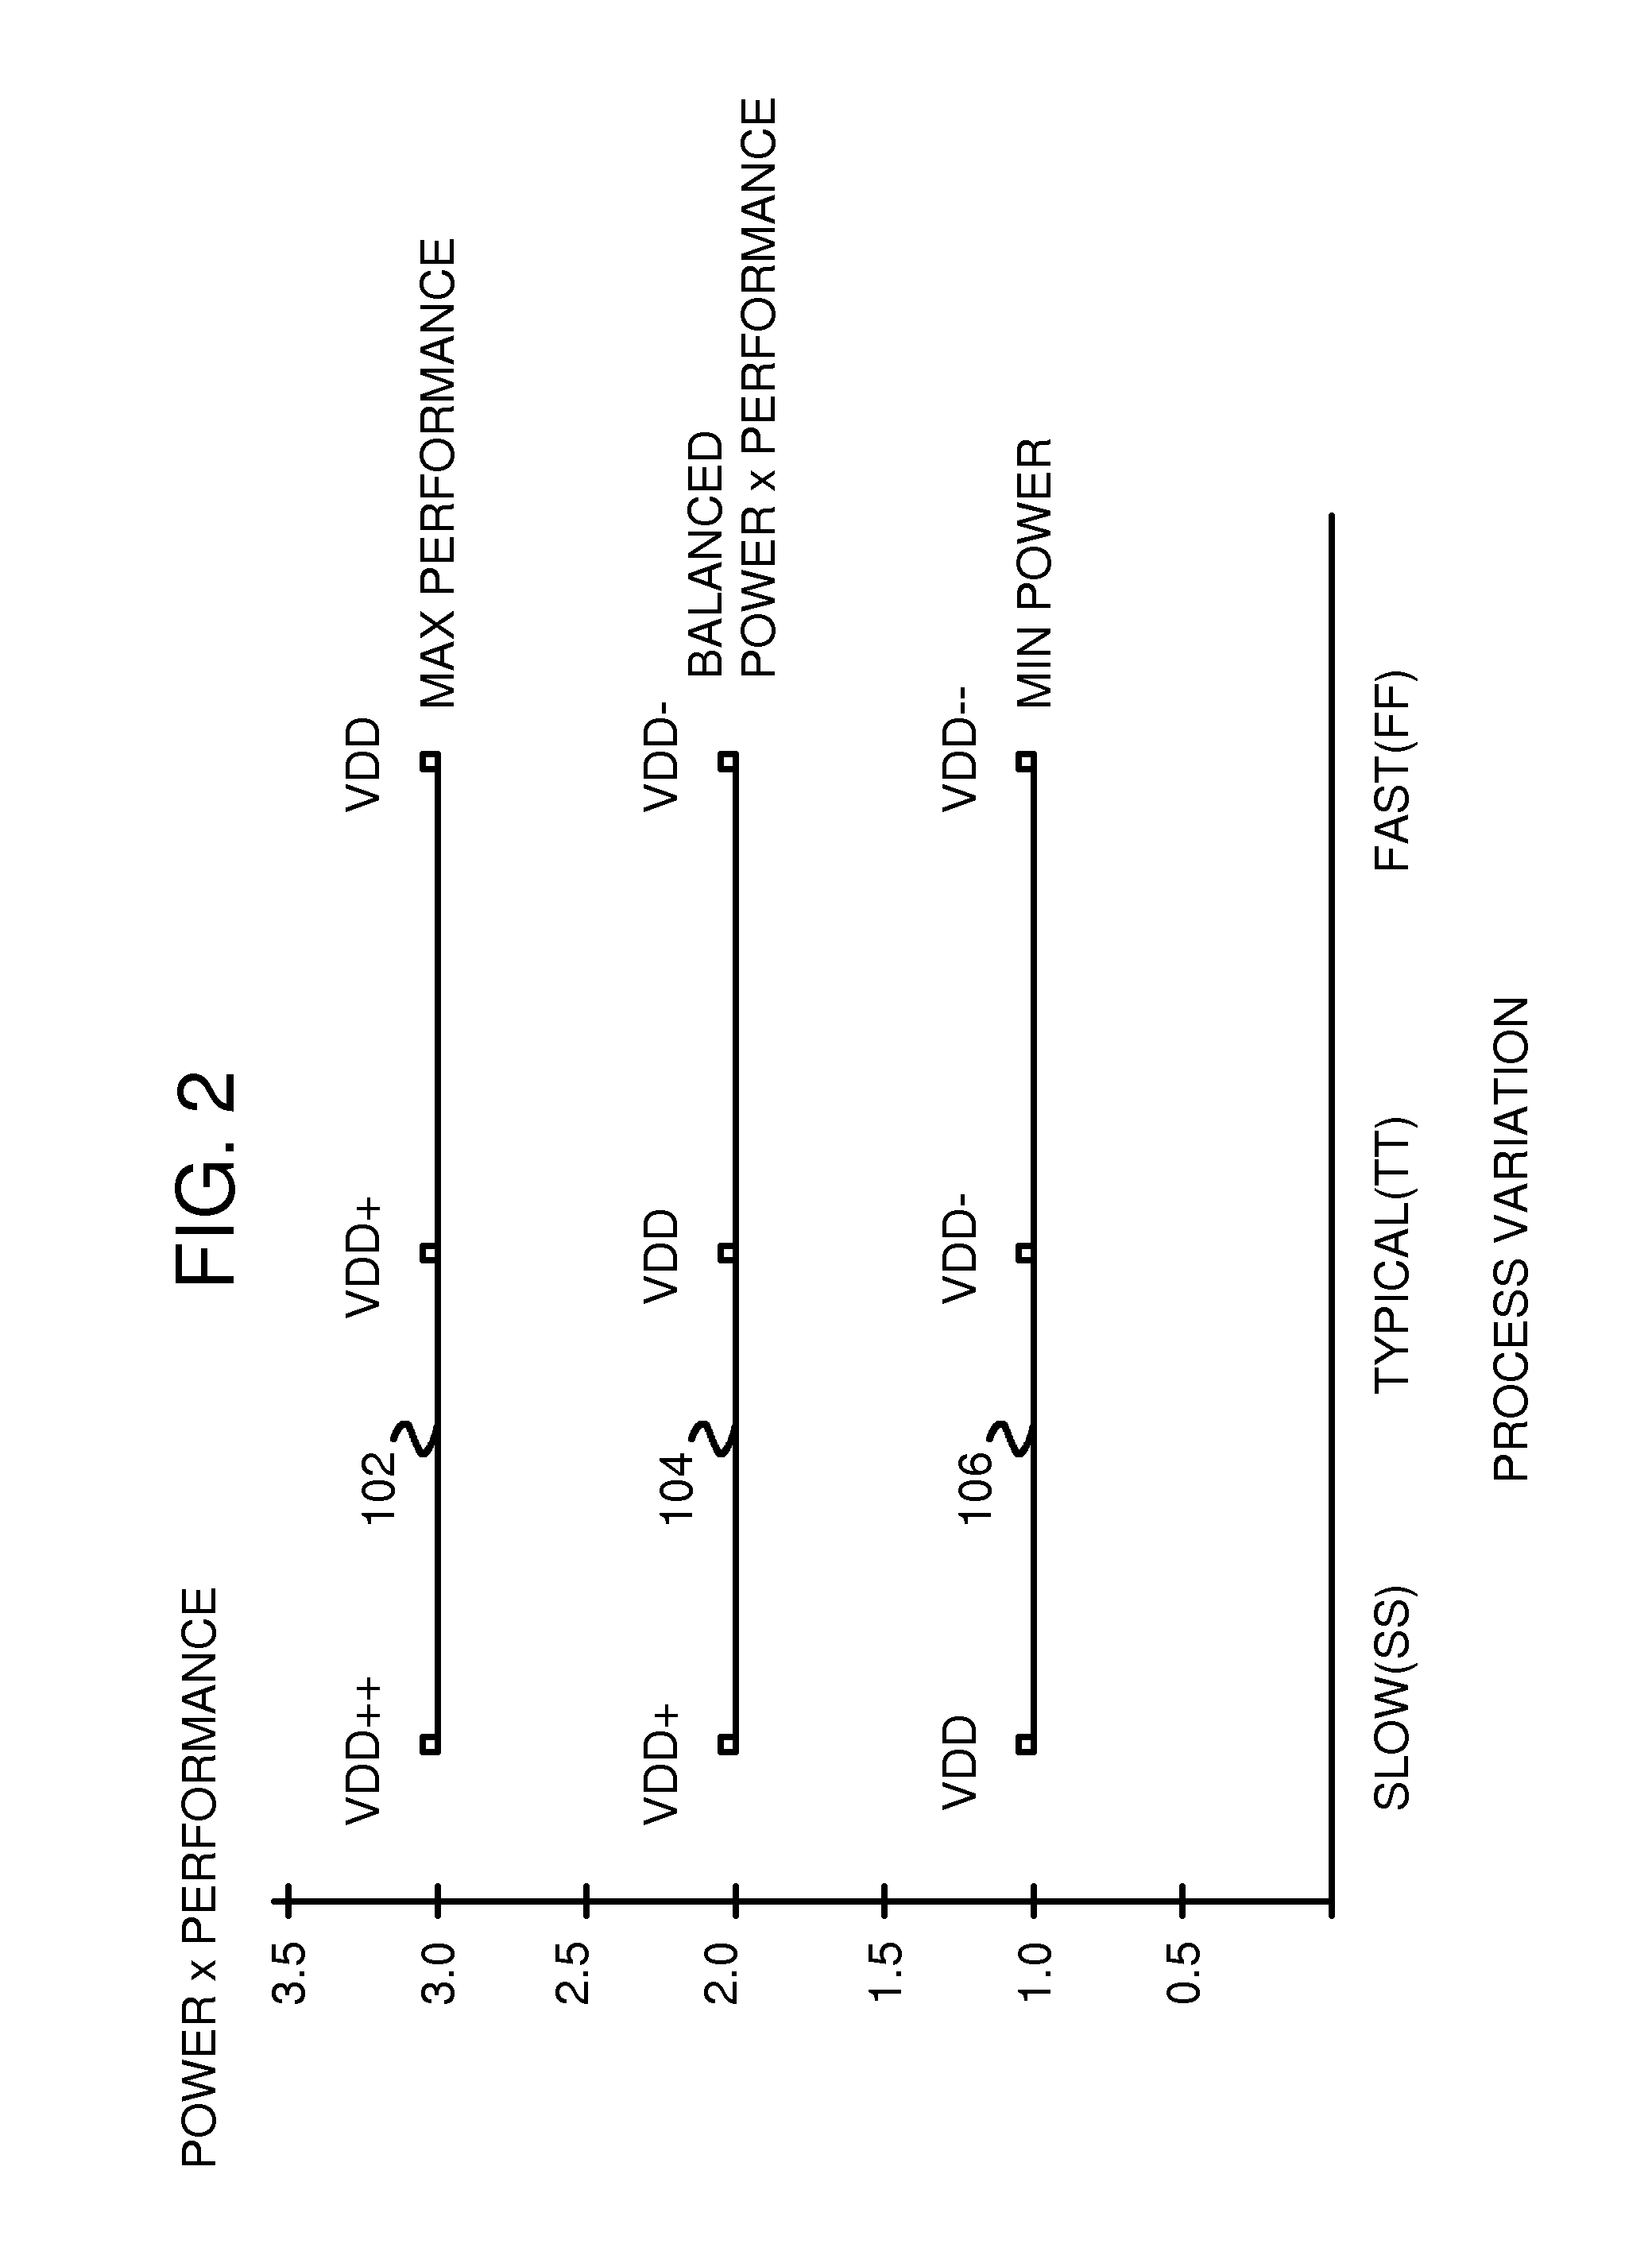 Circuitry and method for measuring negative bias temperature instability (NBTI) and hot carrier injection (HCI) aging effects using edge sensitive sampling